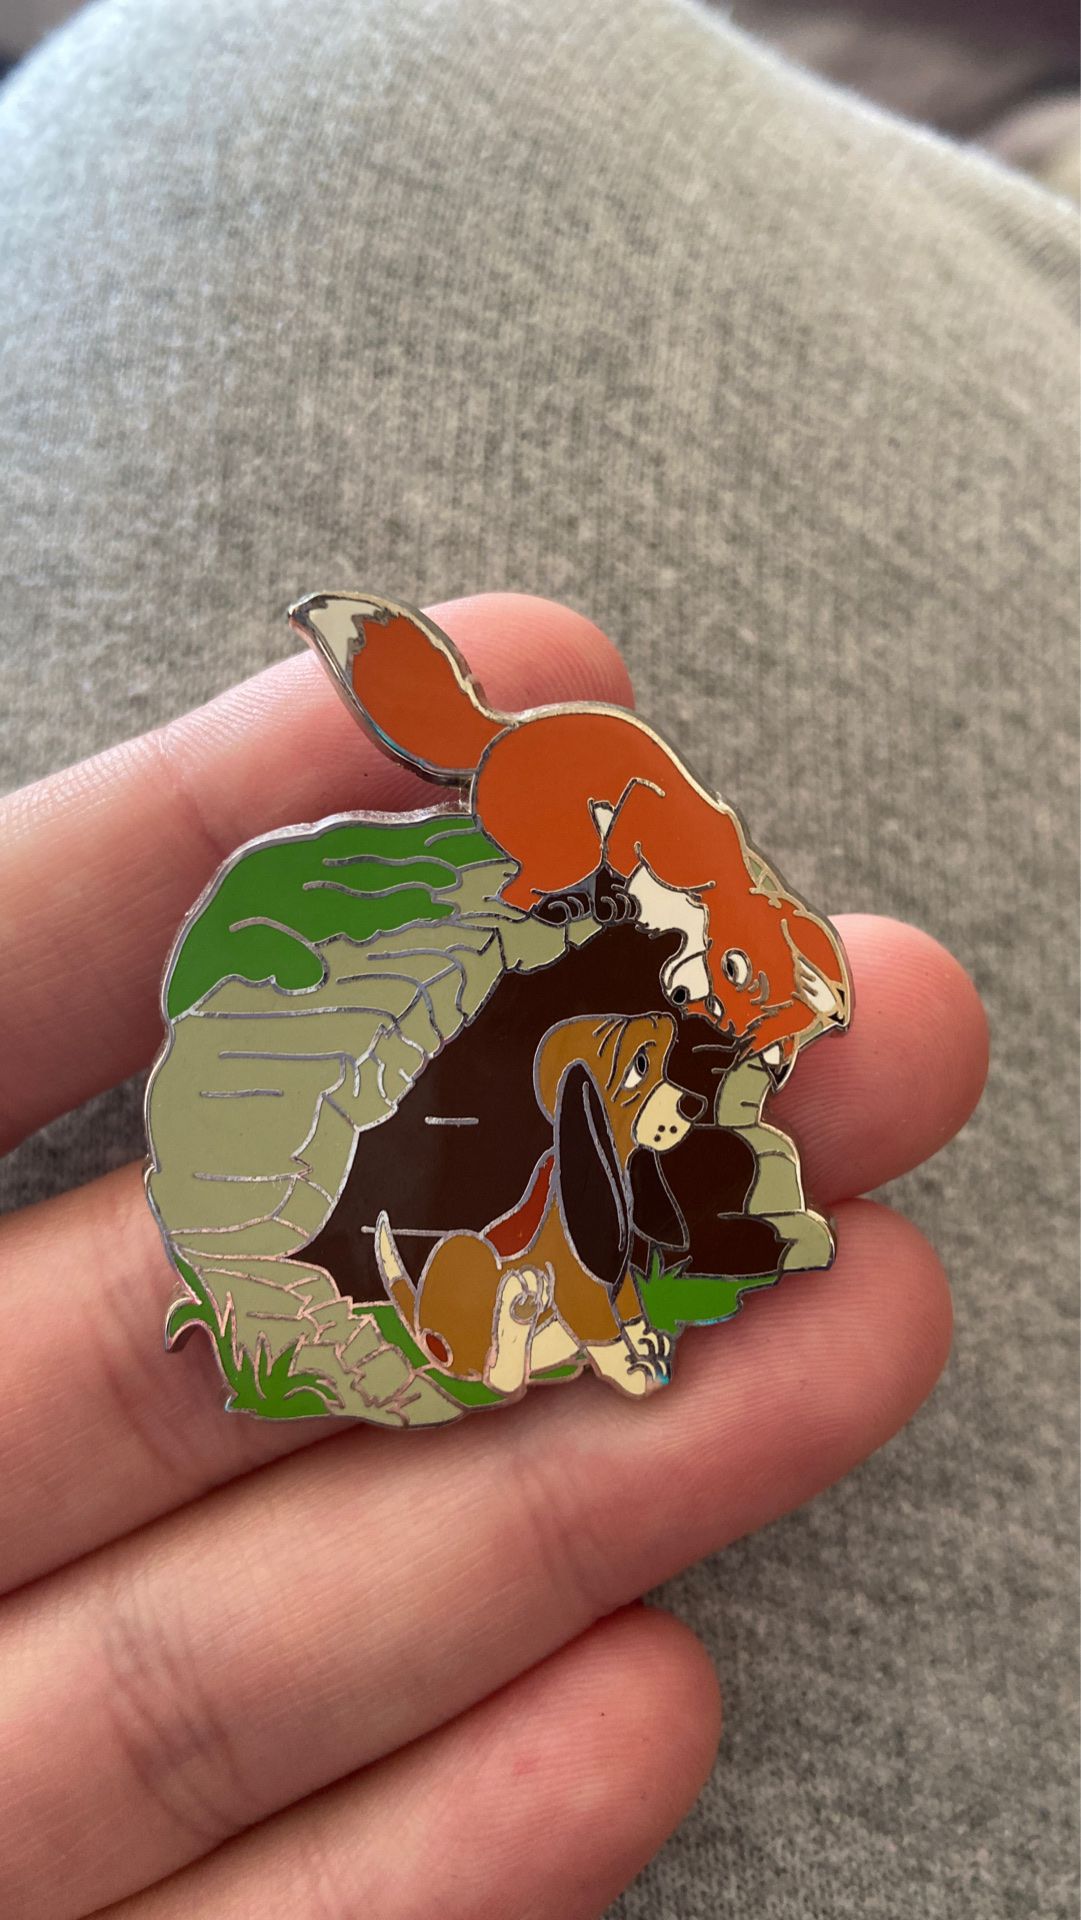 Fox and the hound Disney pin